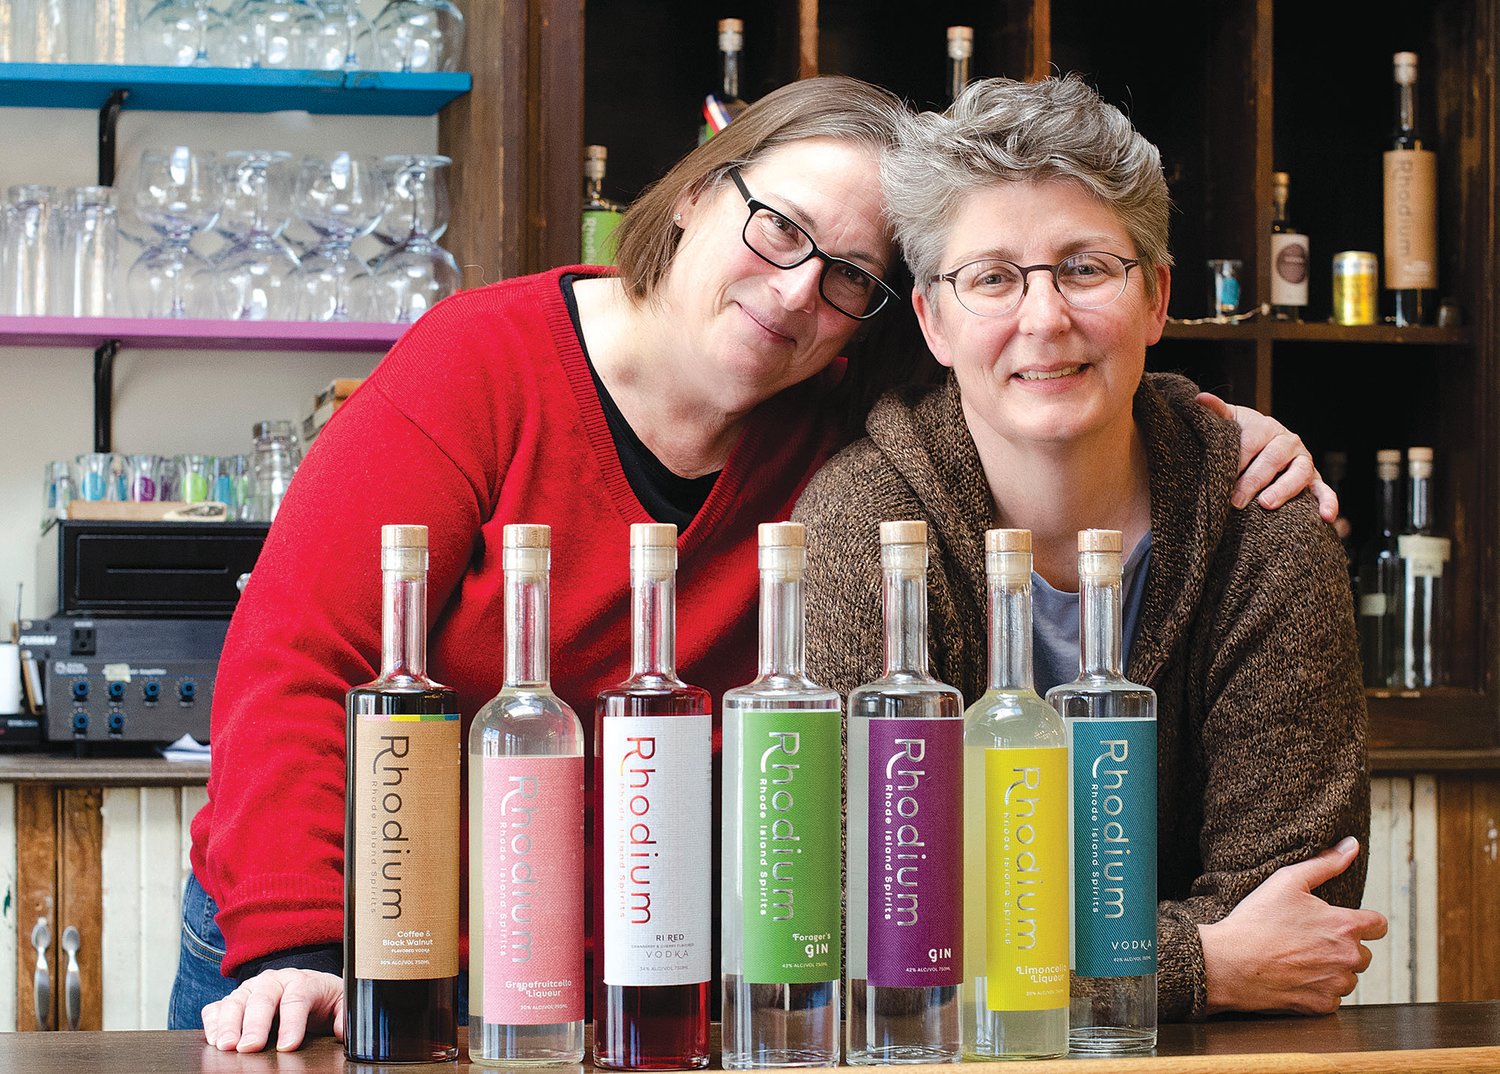 Spouses Cathy Plourde (left) and Kara Larson launched their first professional venture together three years ago. Their Rhode Island Spirits products are now being sold in restaurants and package stores throughout Rhode Island, and they are beginning to work on expansion into Massachusetts.